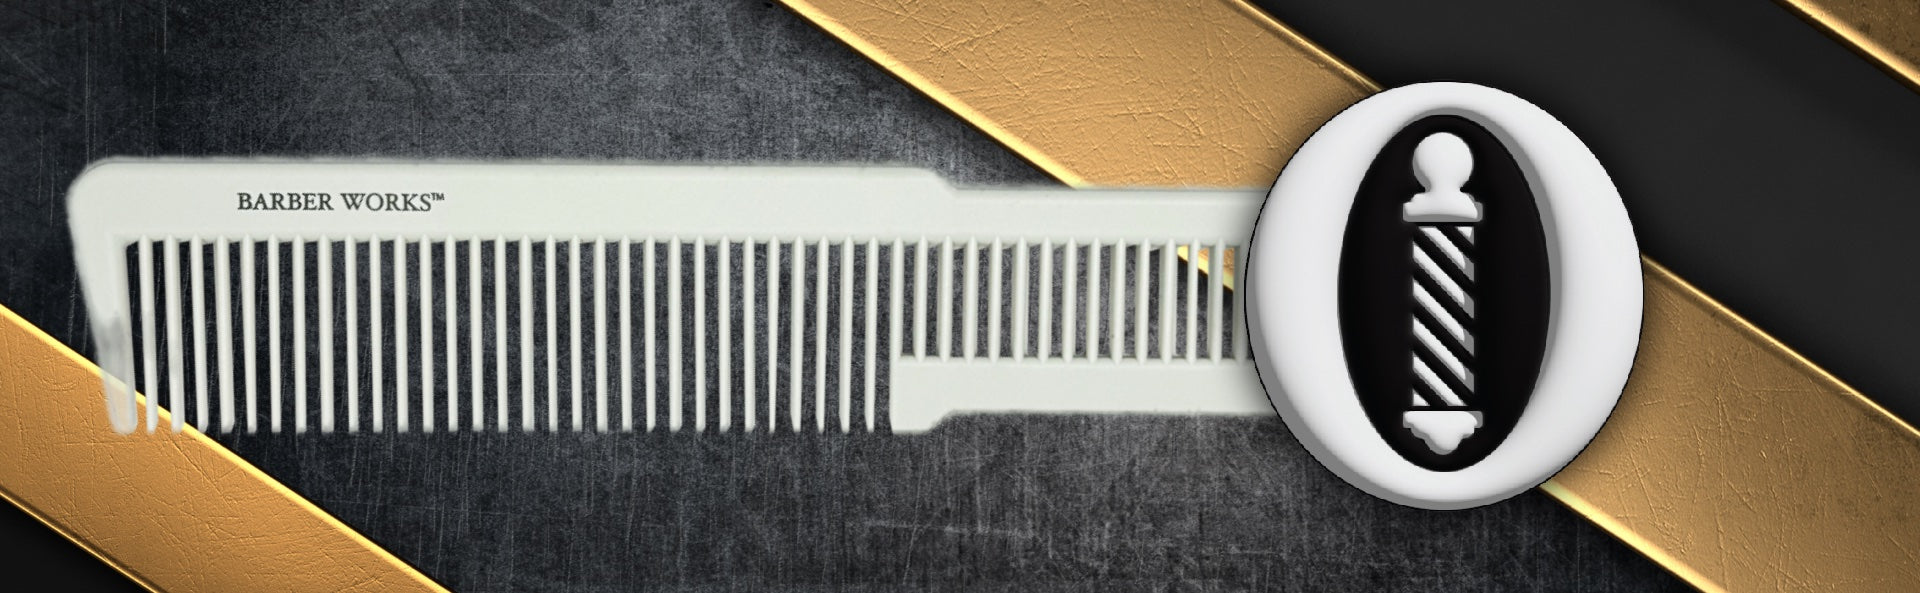 Barber Works Professional Clipper Comb featuring hybrid ceramic and ABS plastic, tailor-made for expert barbers focused on precision clipping.